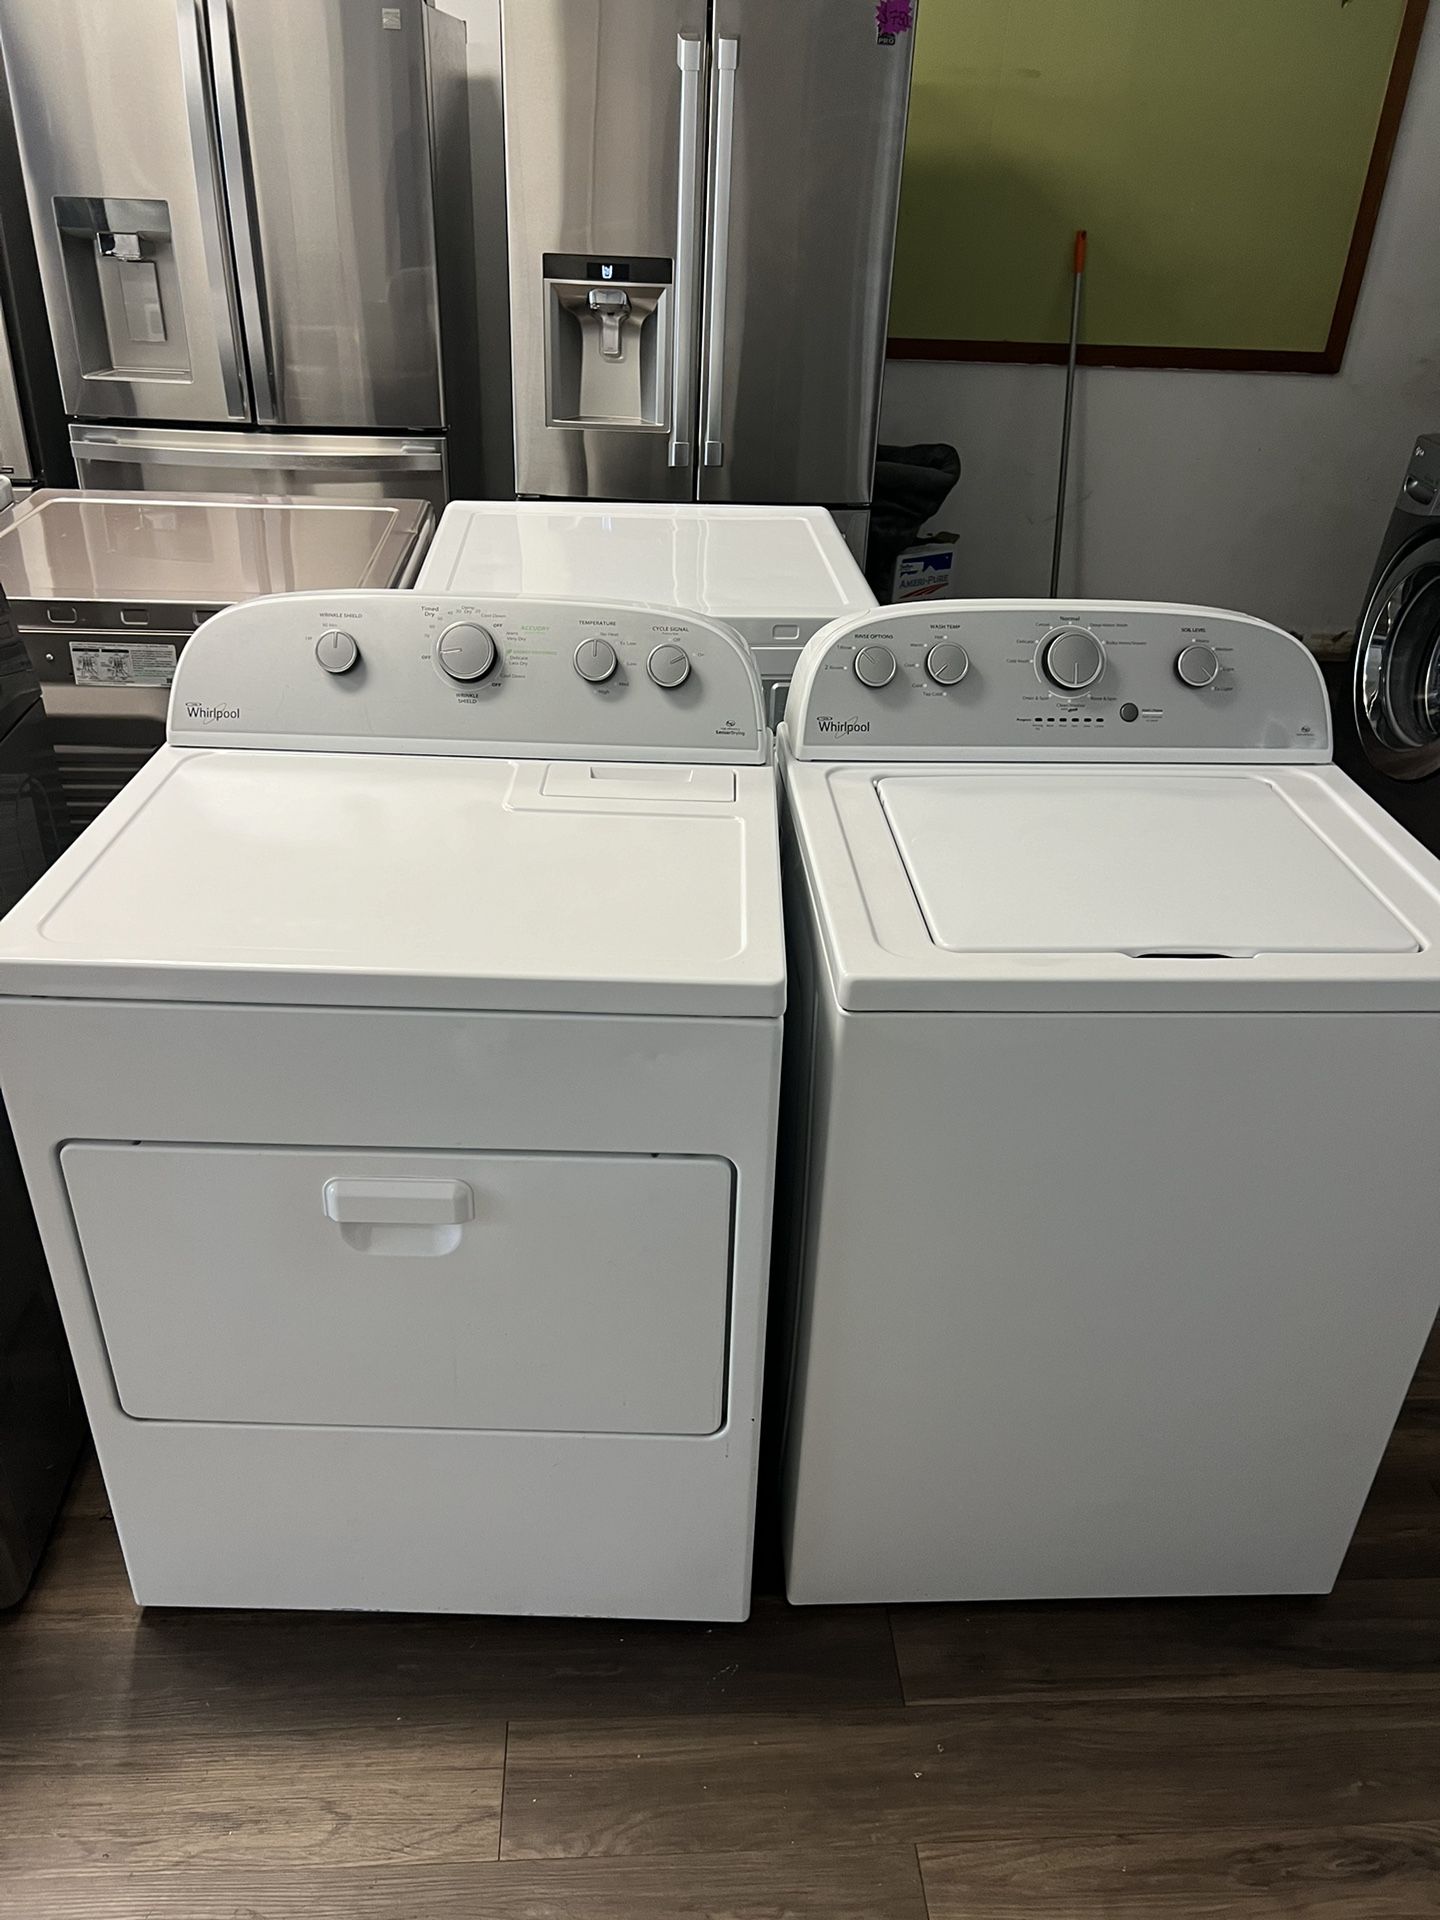 Washer And Dryer  Whirlpool 60 Day Warrranty